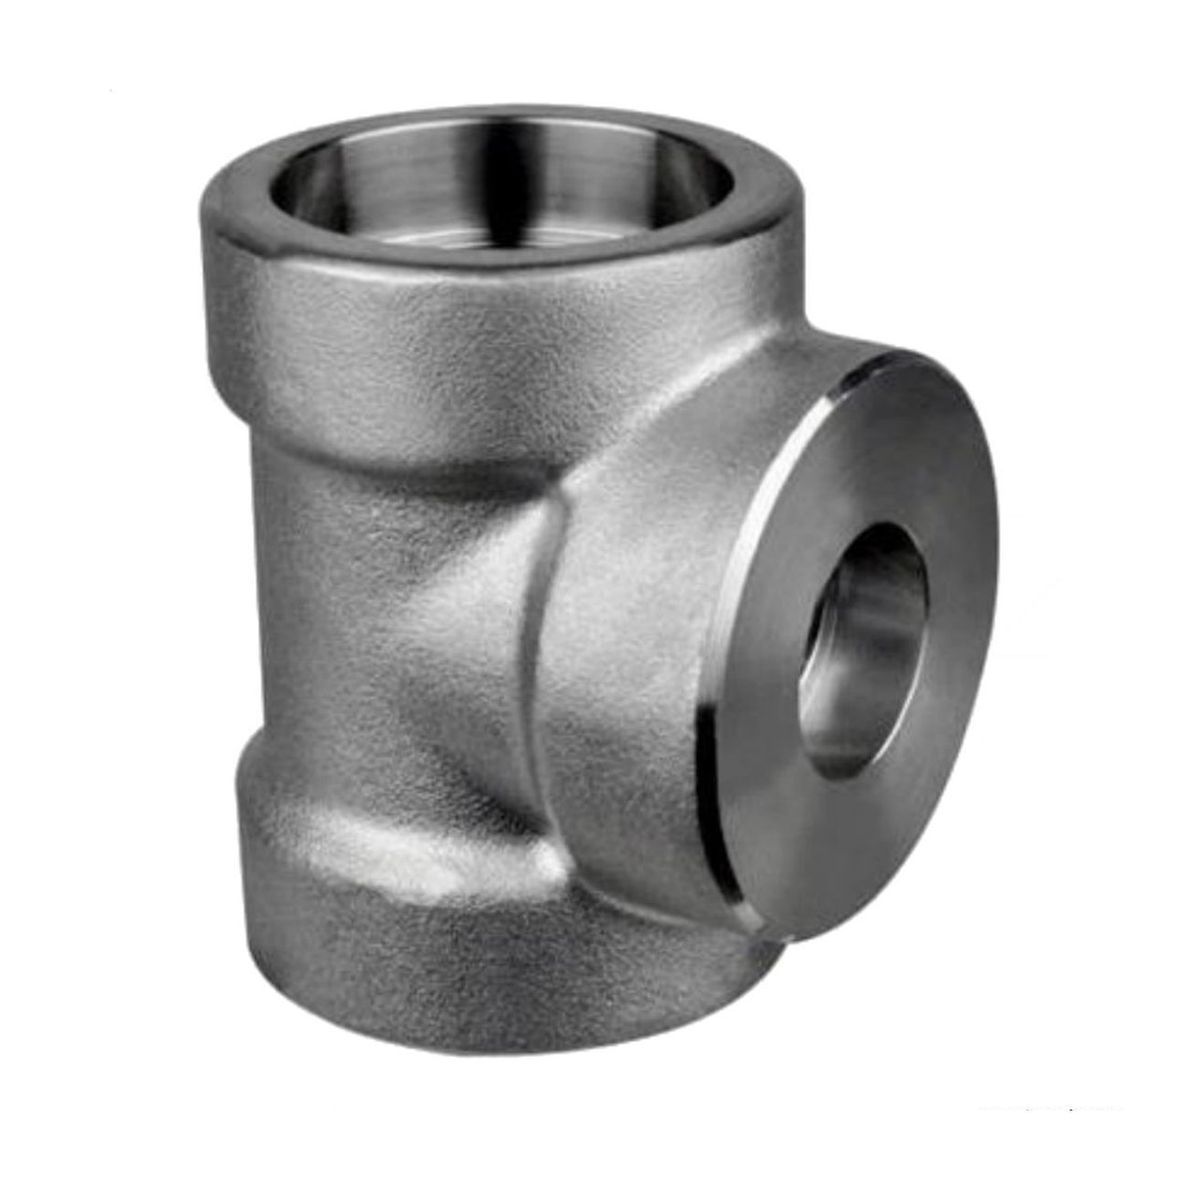 Reducing Tee, Socket Weld Fitting, A105